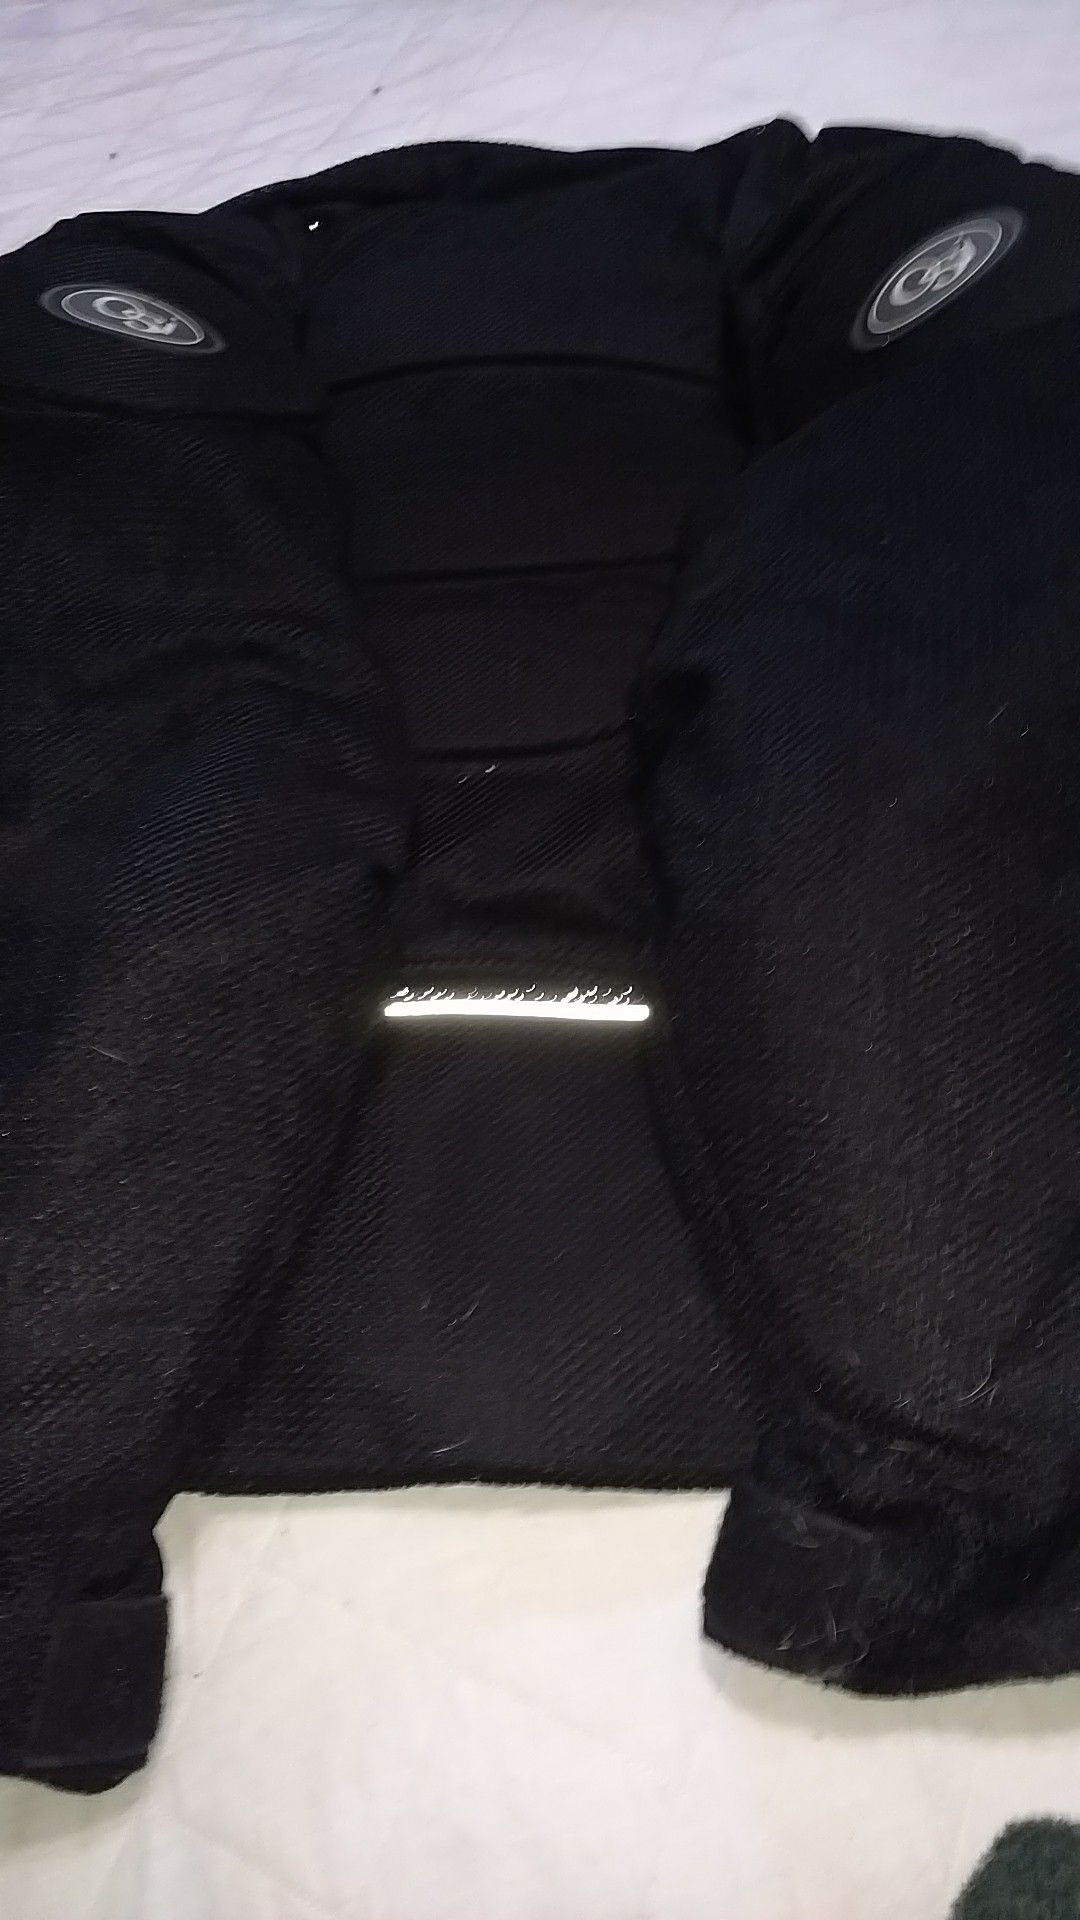 Motorcycle jacket almost brand new hardly ever used